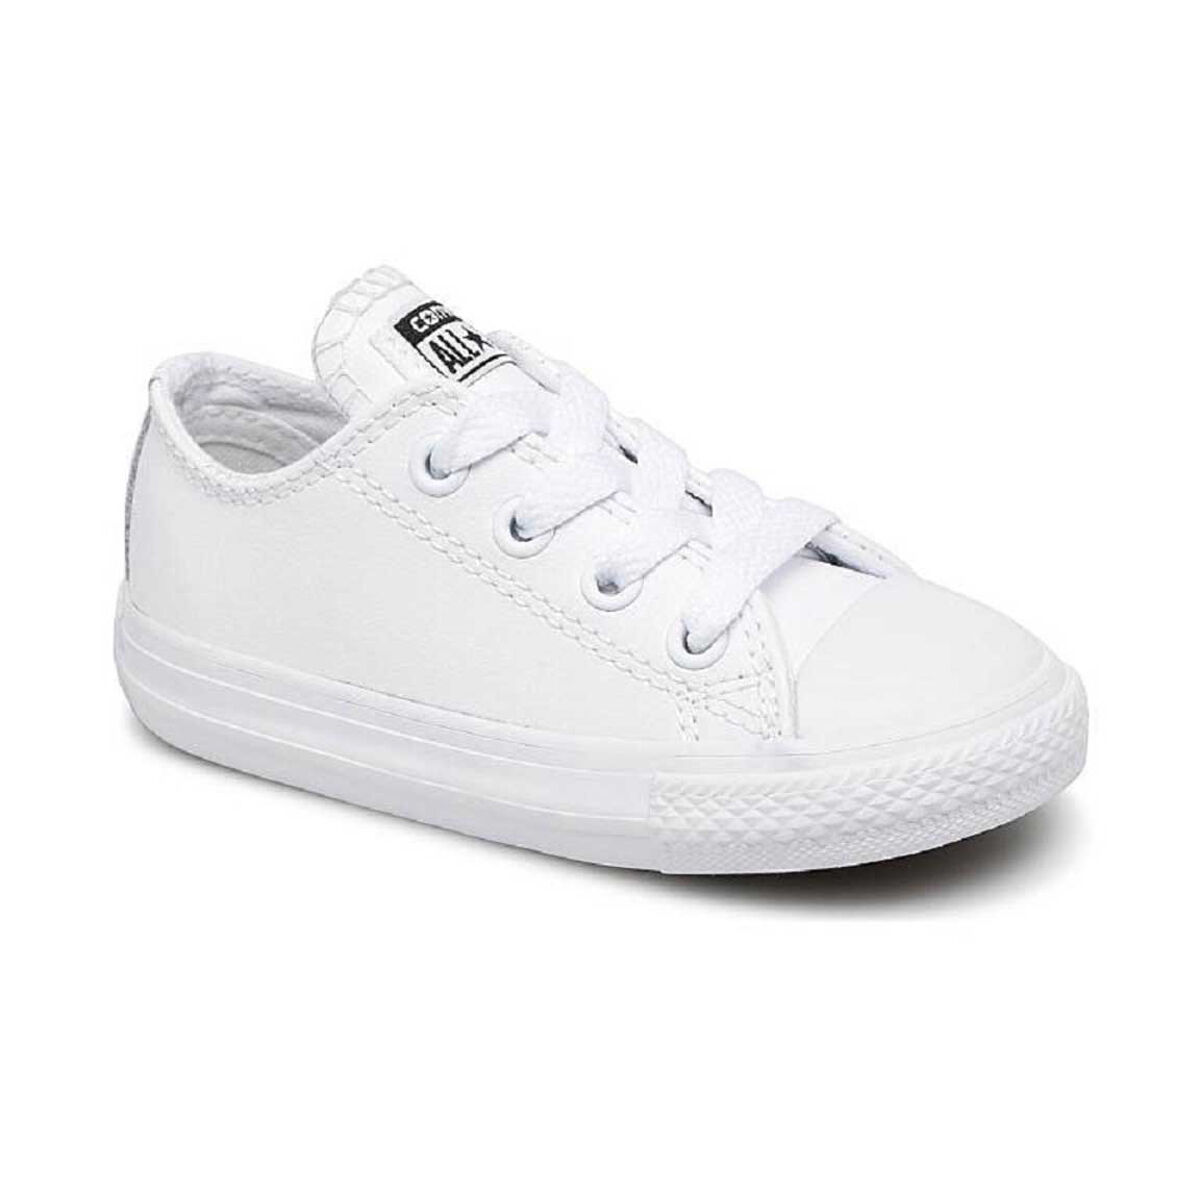 chuck taylor shoes white